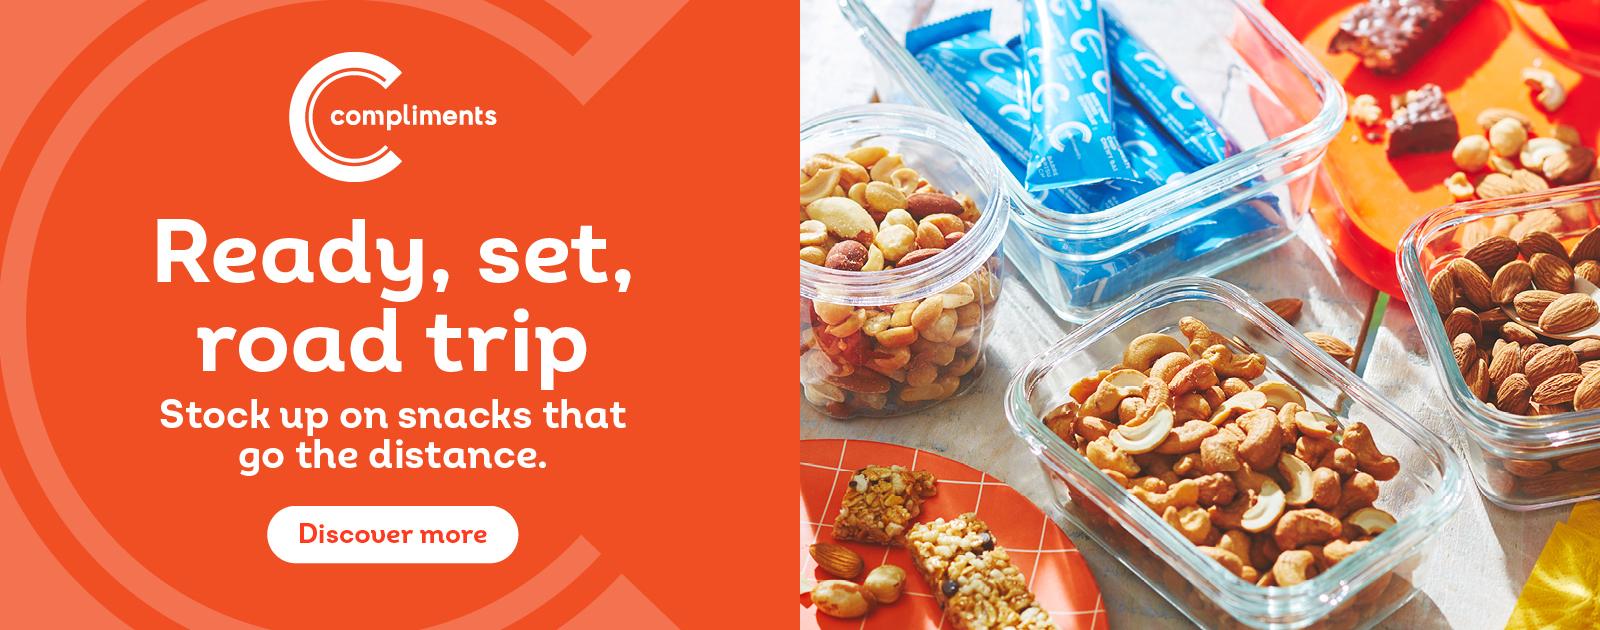 Text Reading 'Ready, set, road trip. Stock up on snacks that go the distance.'